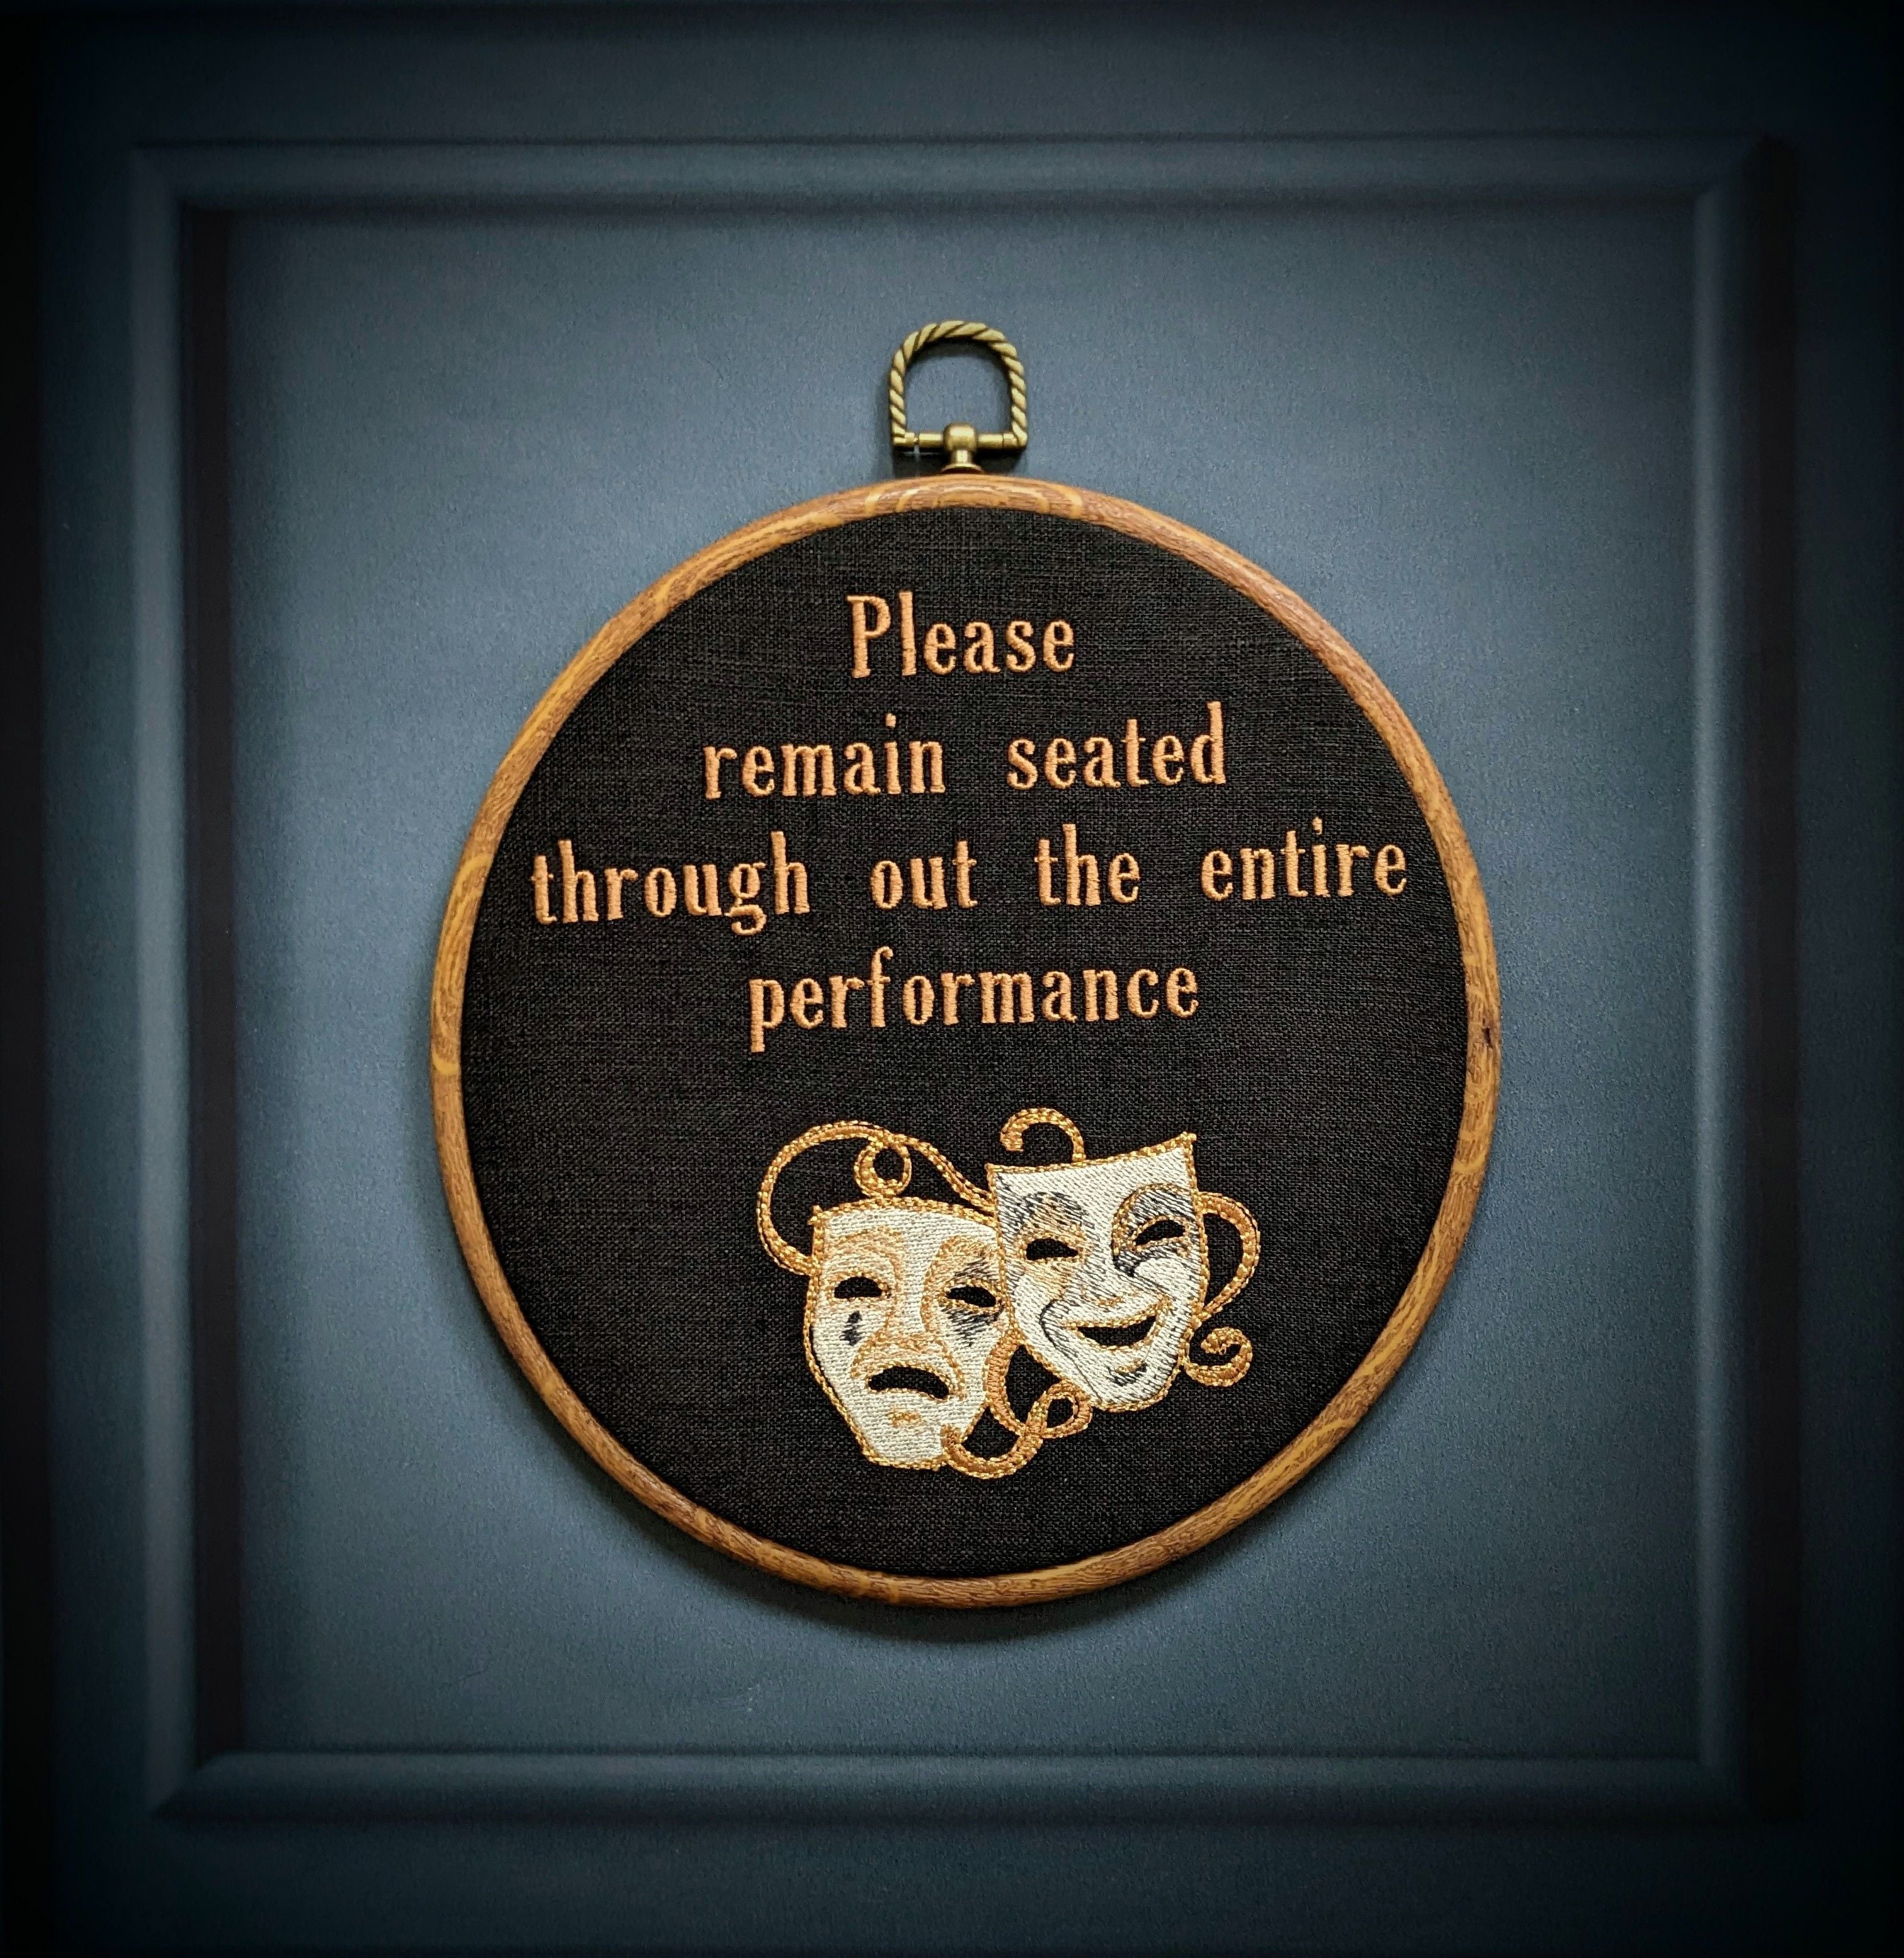 Please remain seated through out the entire performance hoop art. Machine embroidery 8" hoop. Gothic décor, bathroom décor.